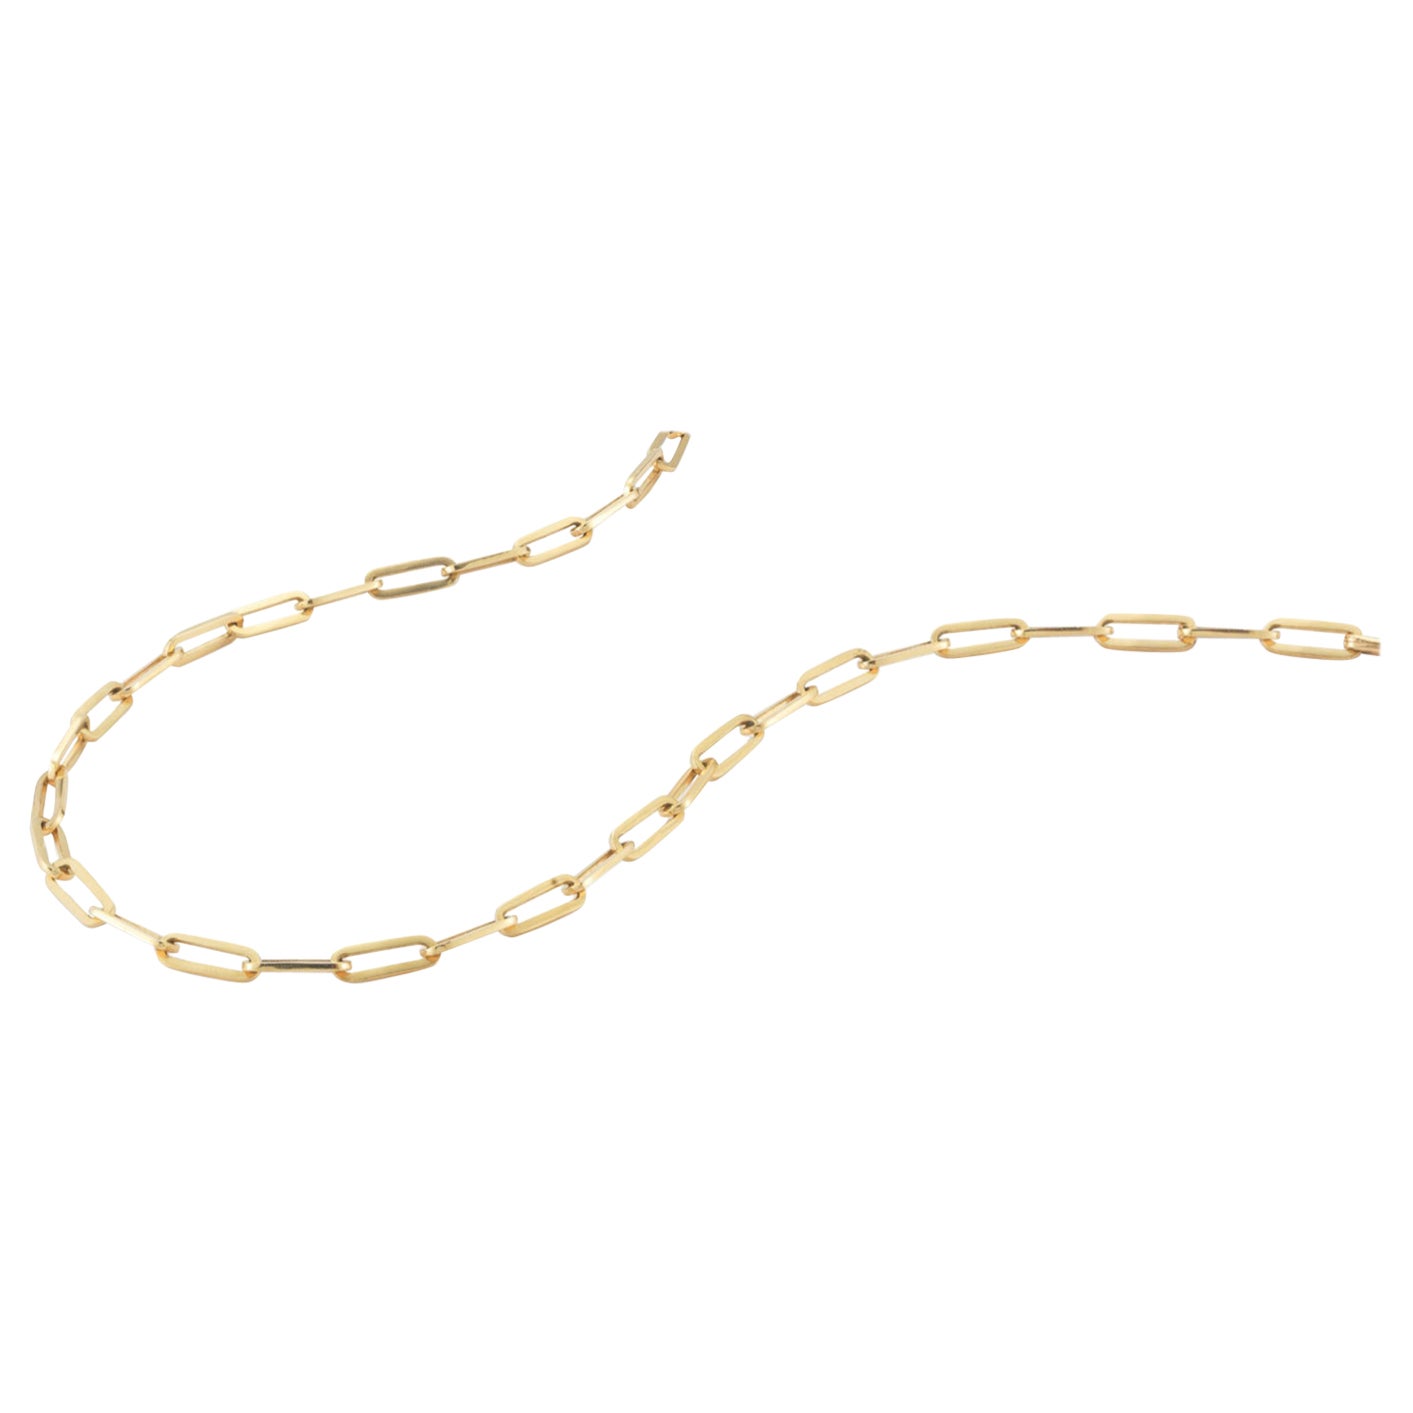 Garland Collection 14k Yellow, Rose or White Gold Handmade Link Necklace Chain